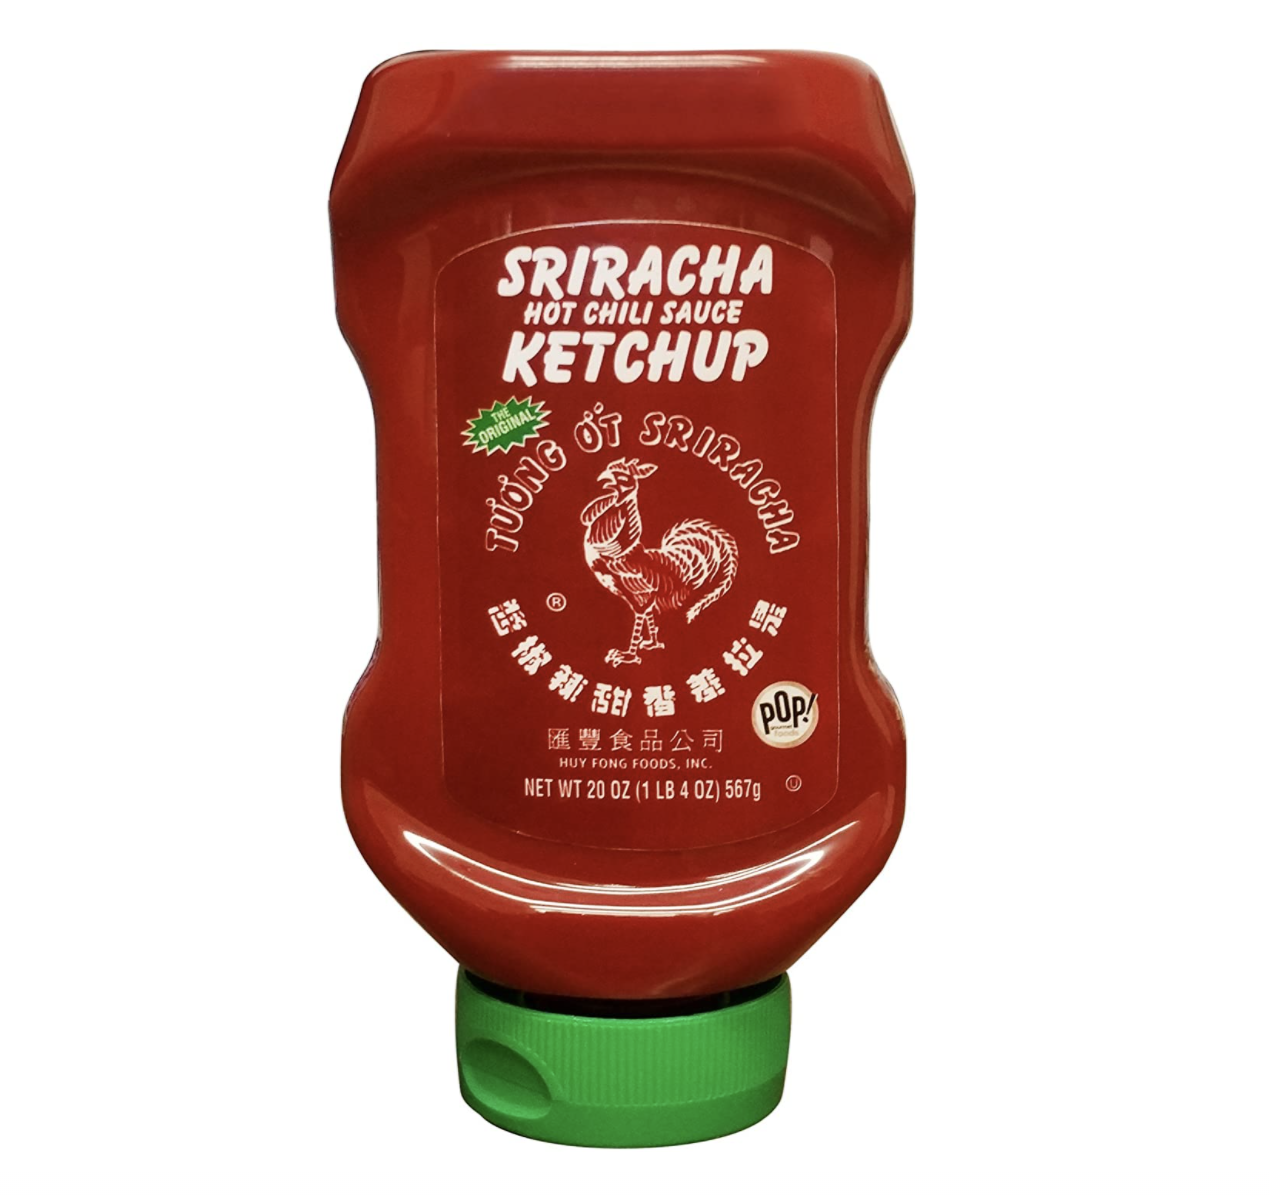 A bottle of Sriracha ketchup on a blank background